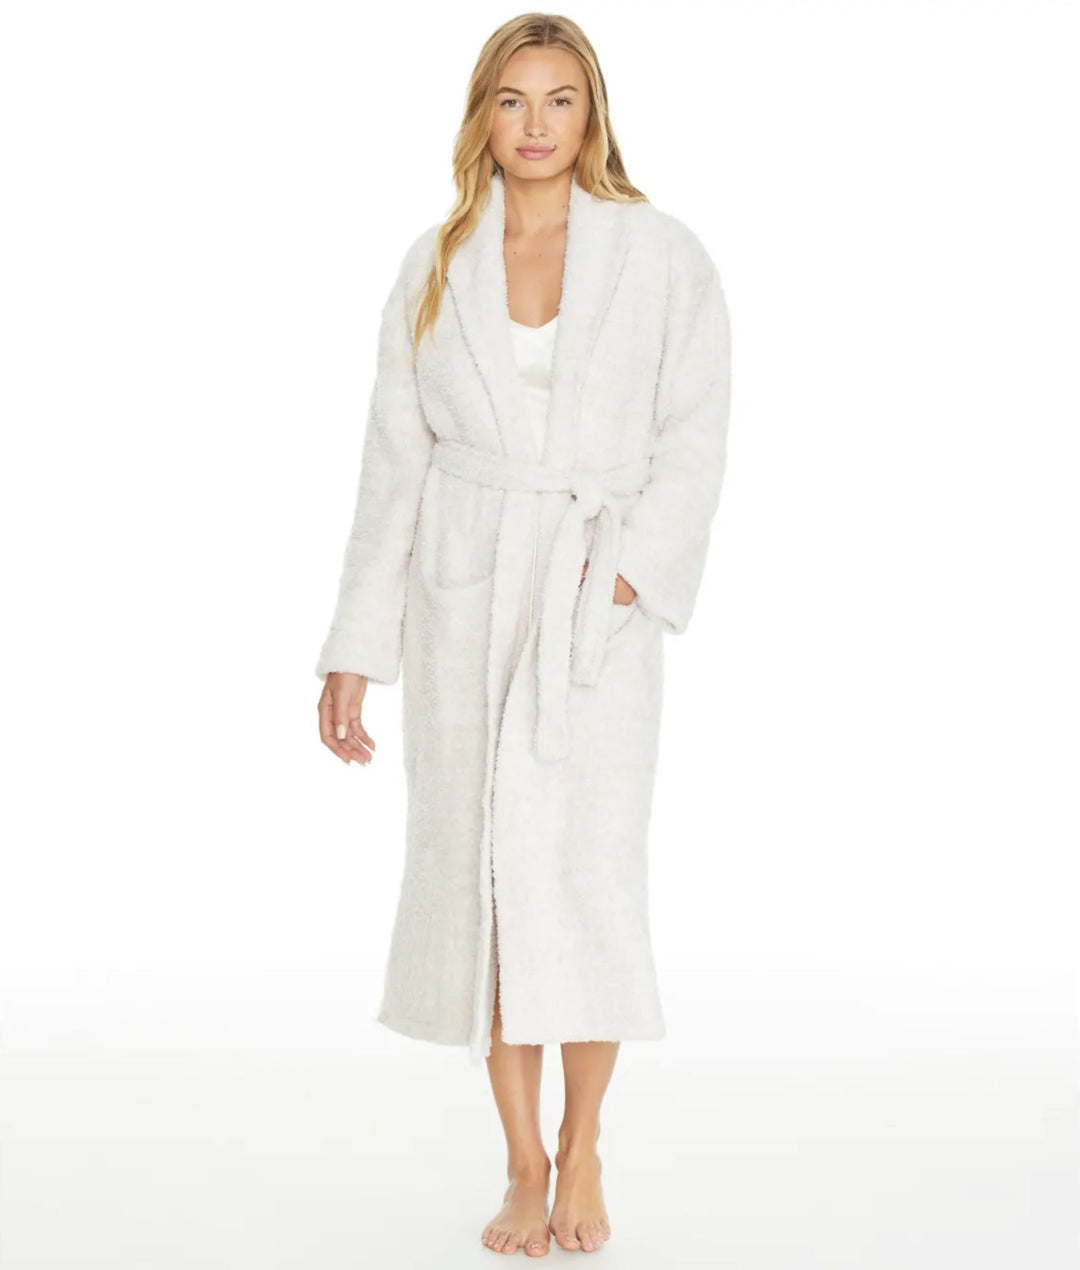 Adult Heathered Robe - Size 1 Robe Barefoot Dreams Stone and White 